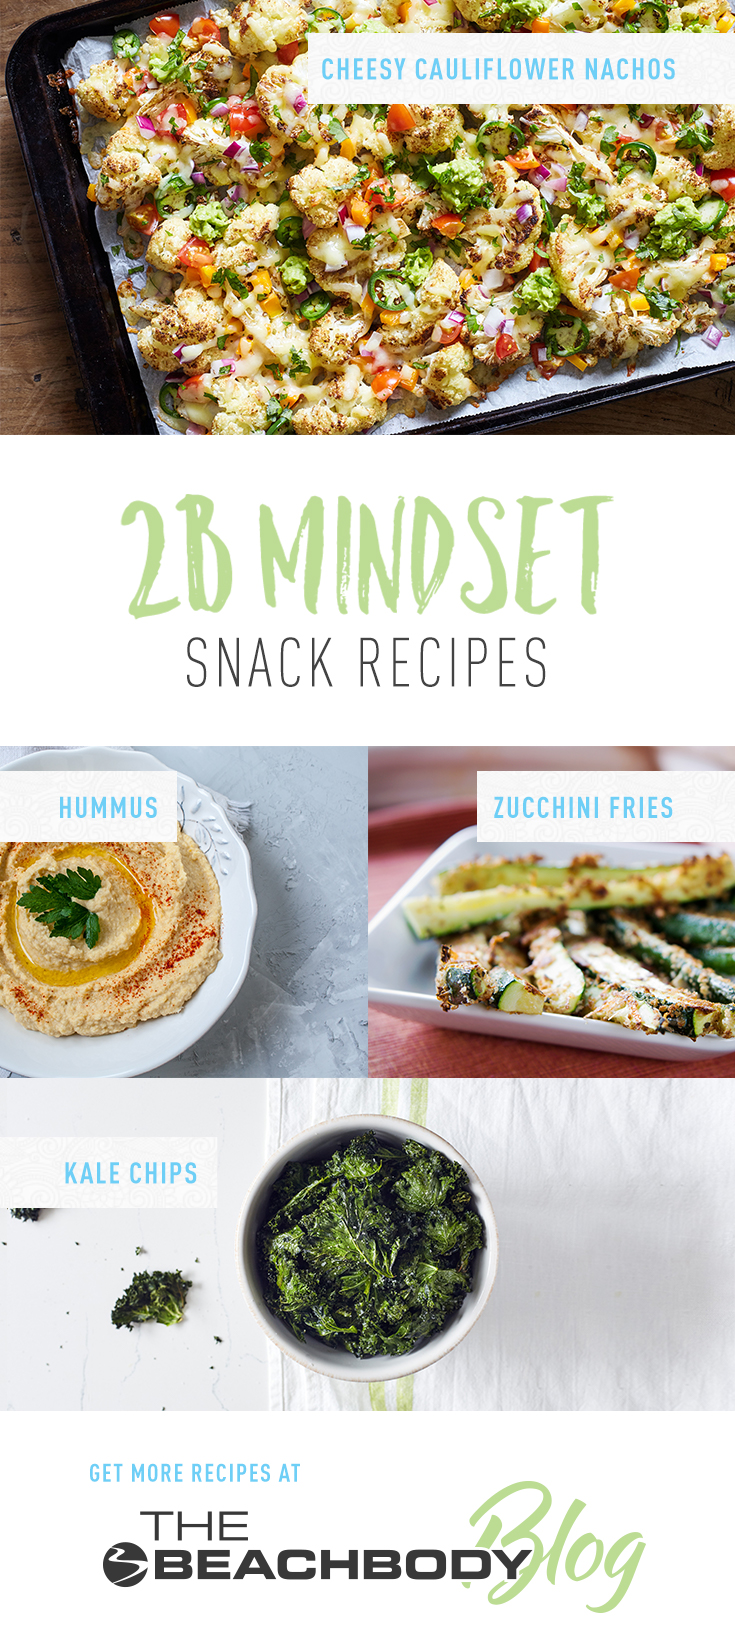 2B-approved snack recipes